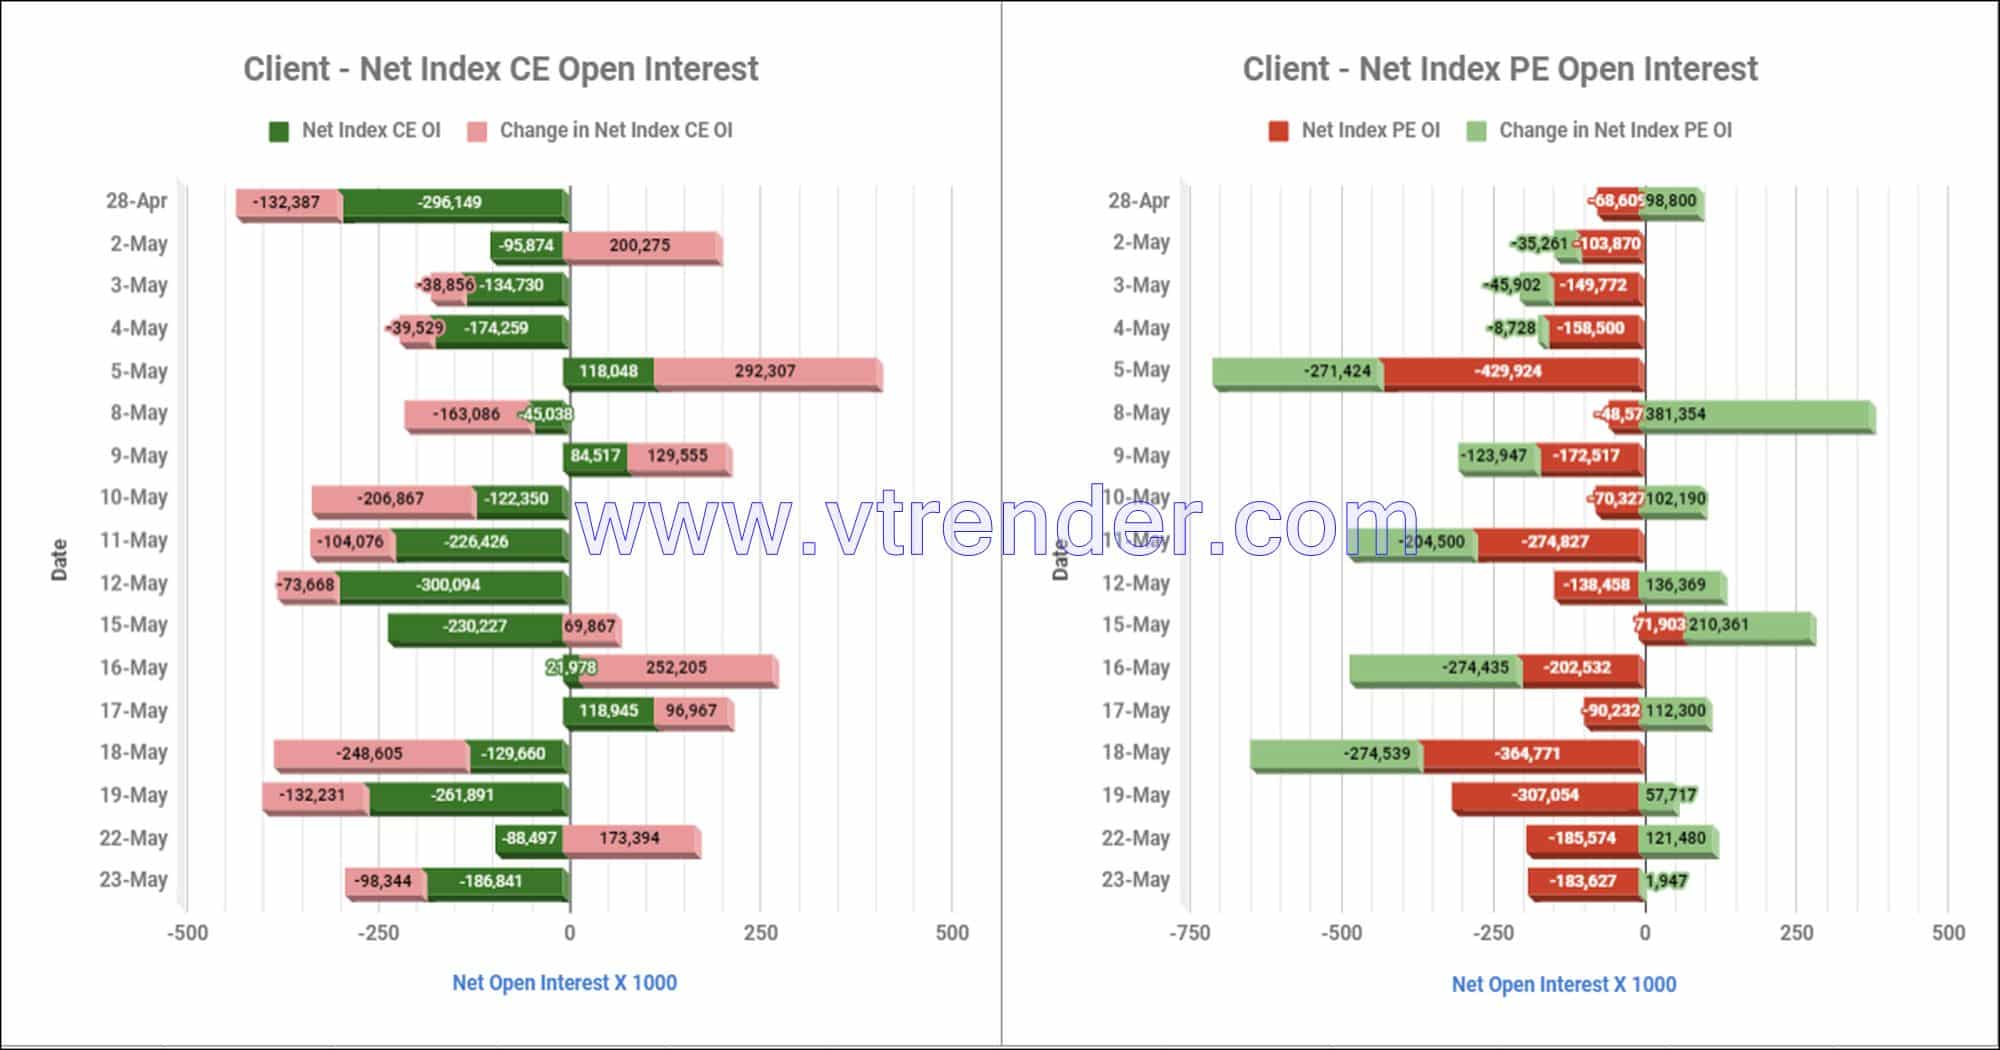 Clientinop23May Participantwise Net Open Interest And Net Equity Investments – 23Rd May 2023 Client, Equity, Fii, Index Futures, Index Options, Open Interest, Prop